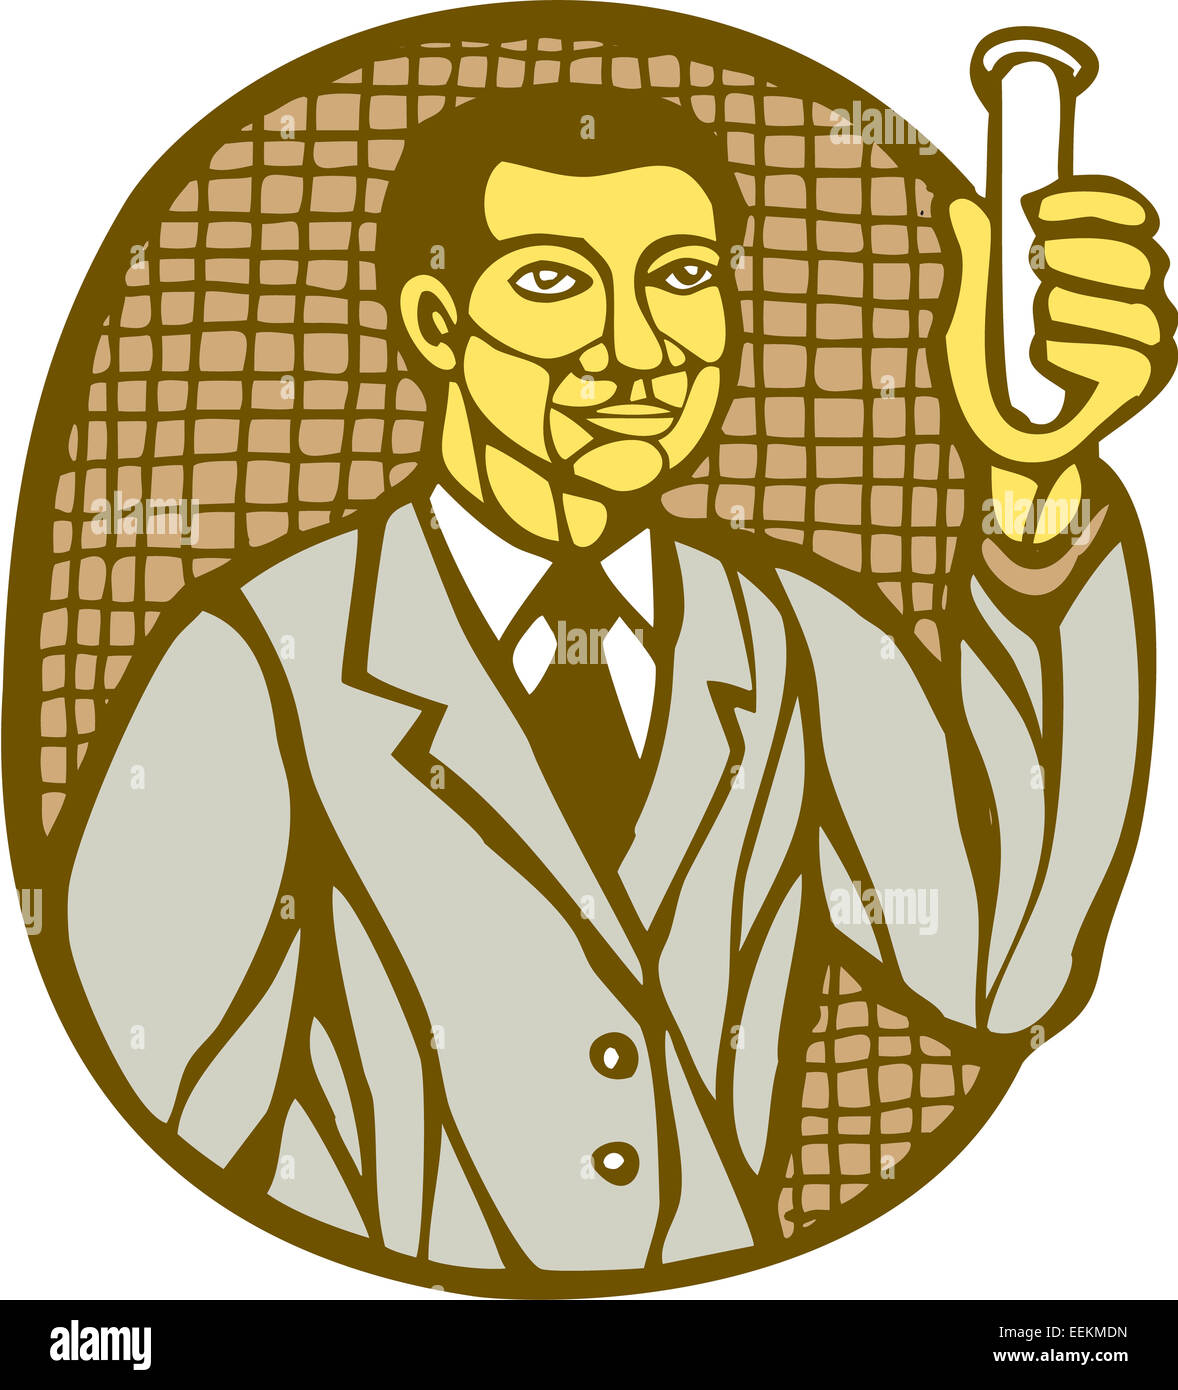 Illustration of an asian scientist holding test tube facing front set inside circle done in retro woodcut linocut style. Stock Photo